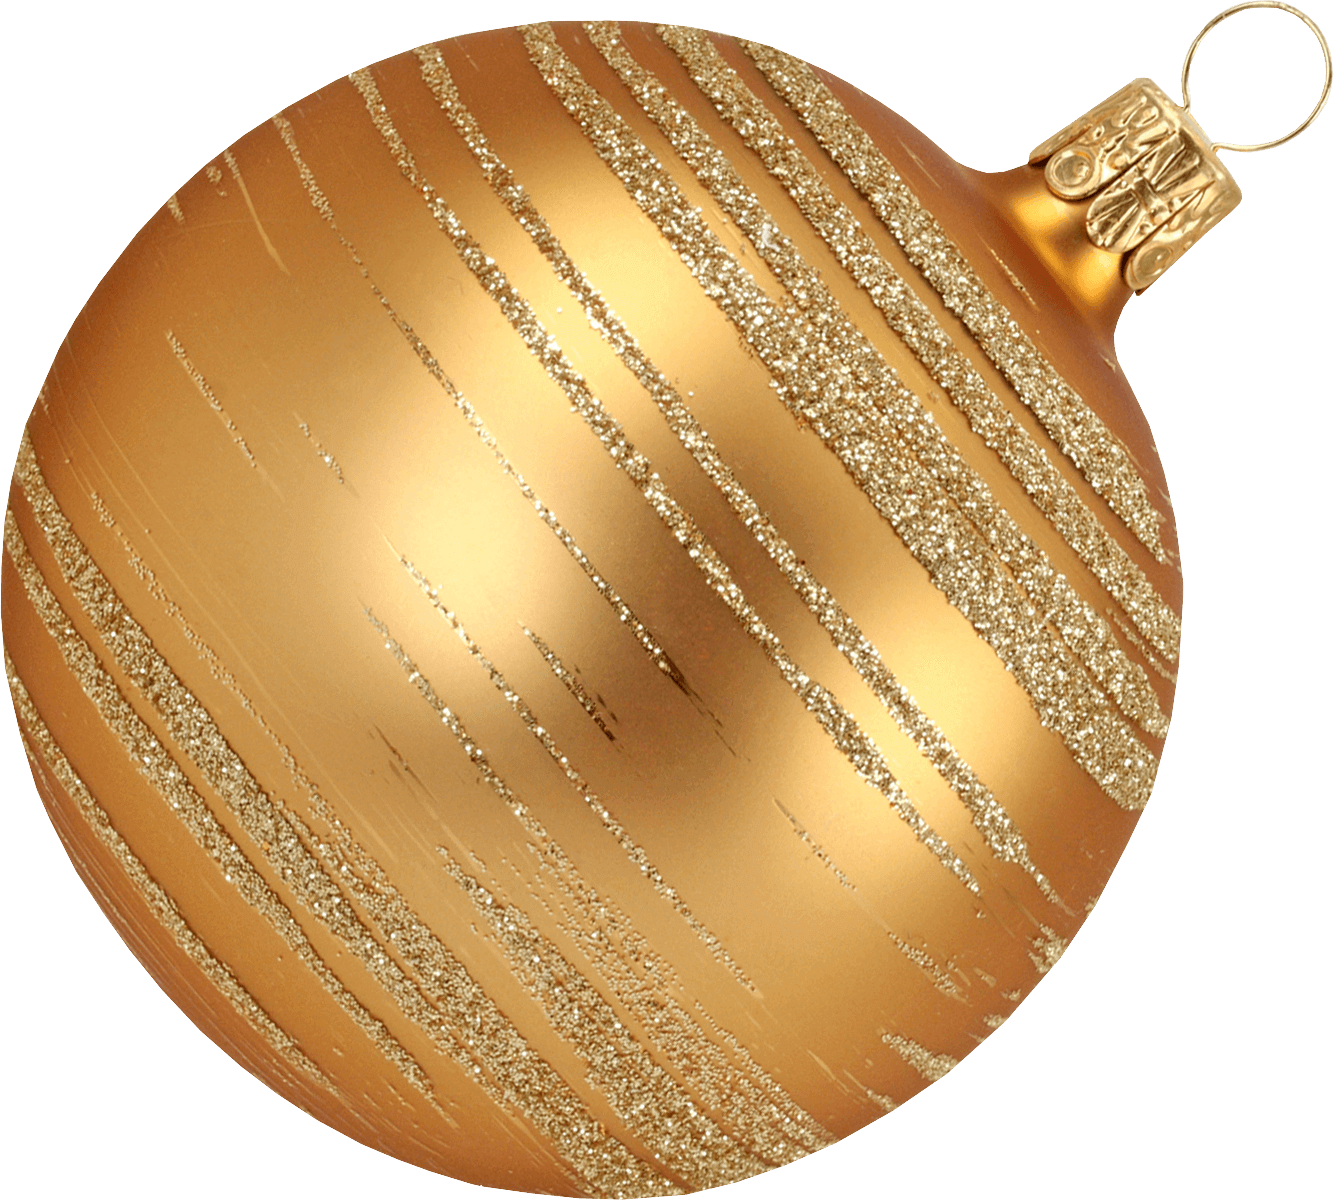 Gold Christmas Ornaments PNG Transparent Image